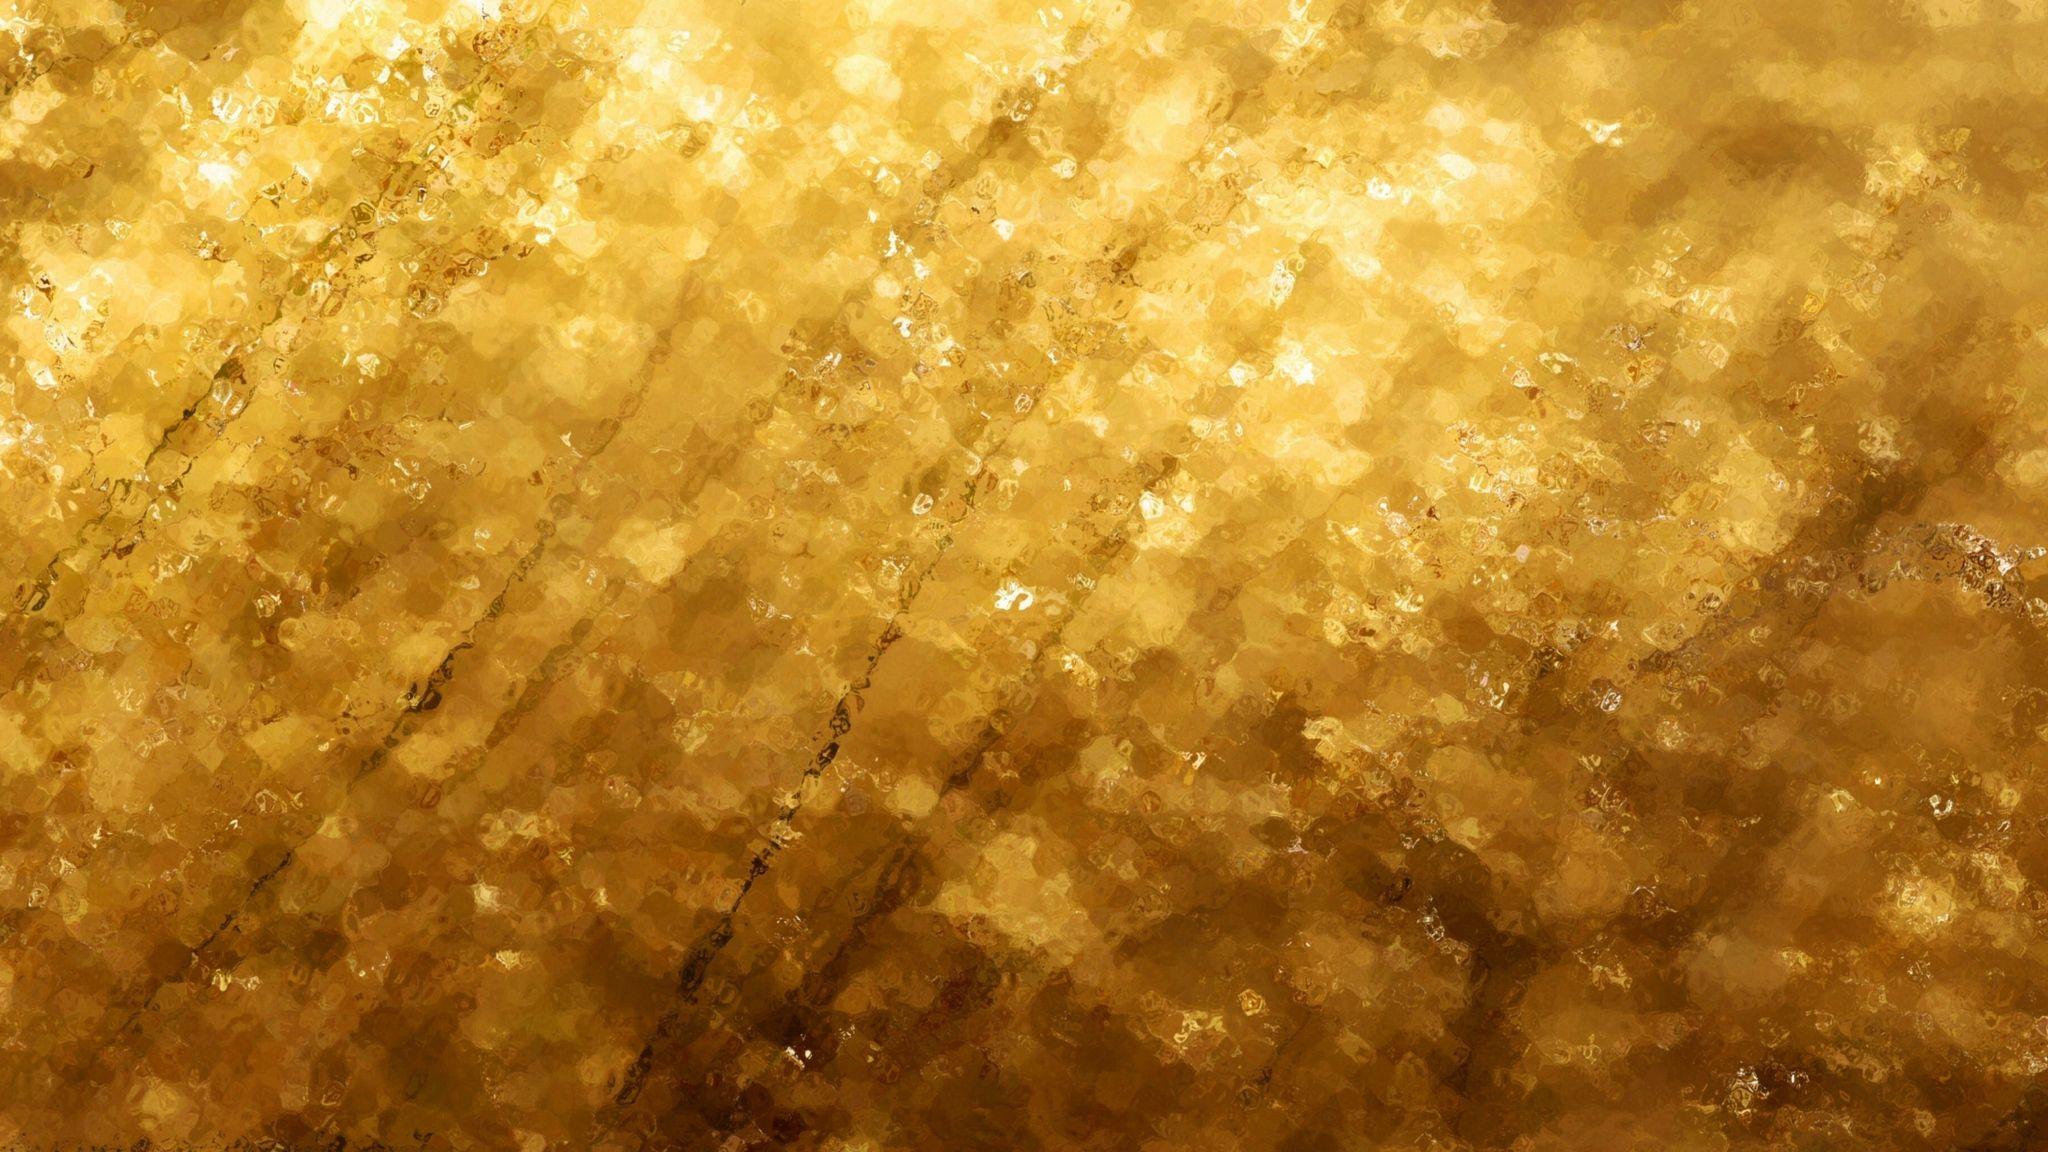 Download wallpaper 2048x1152 gold, background, texture ultrawide